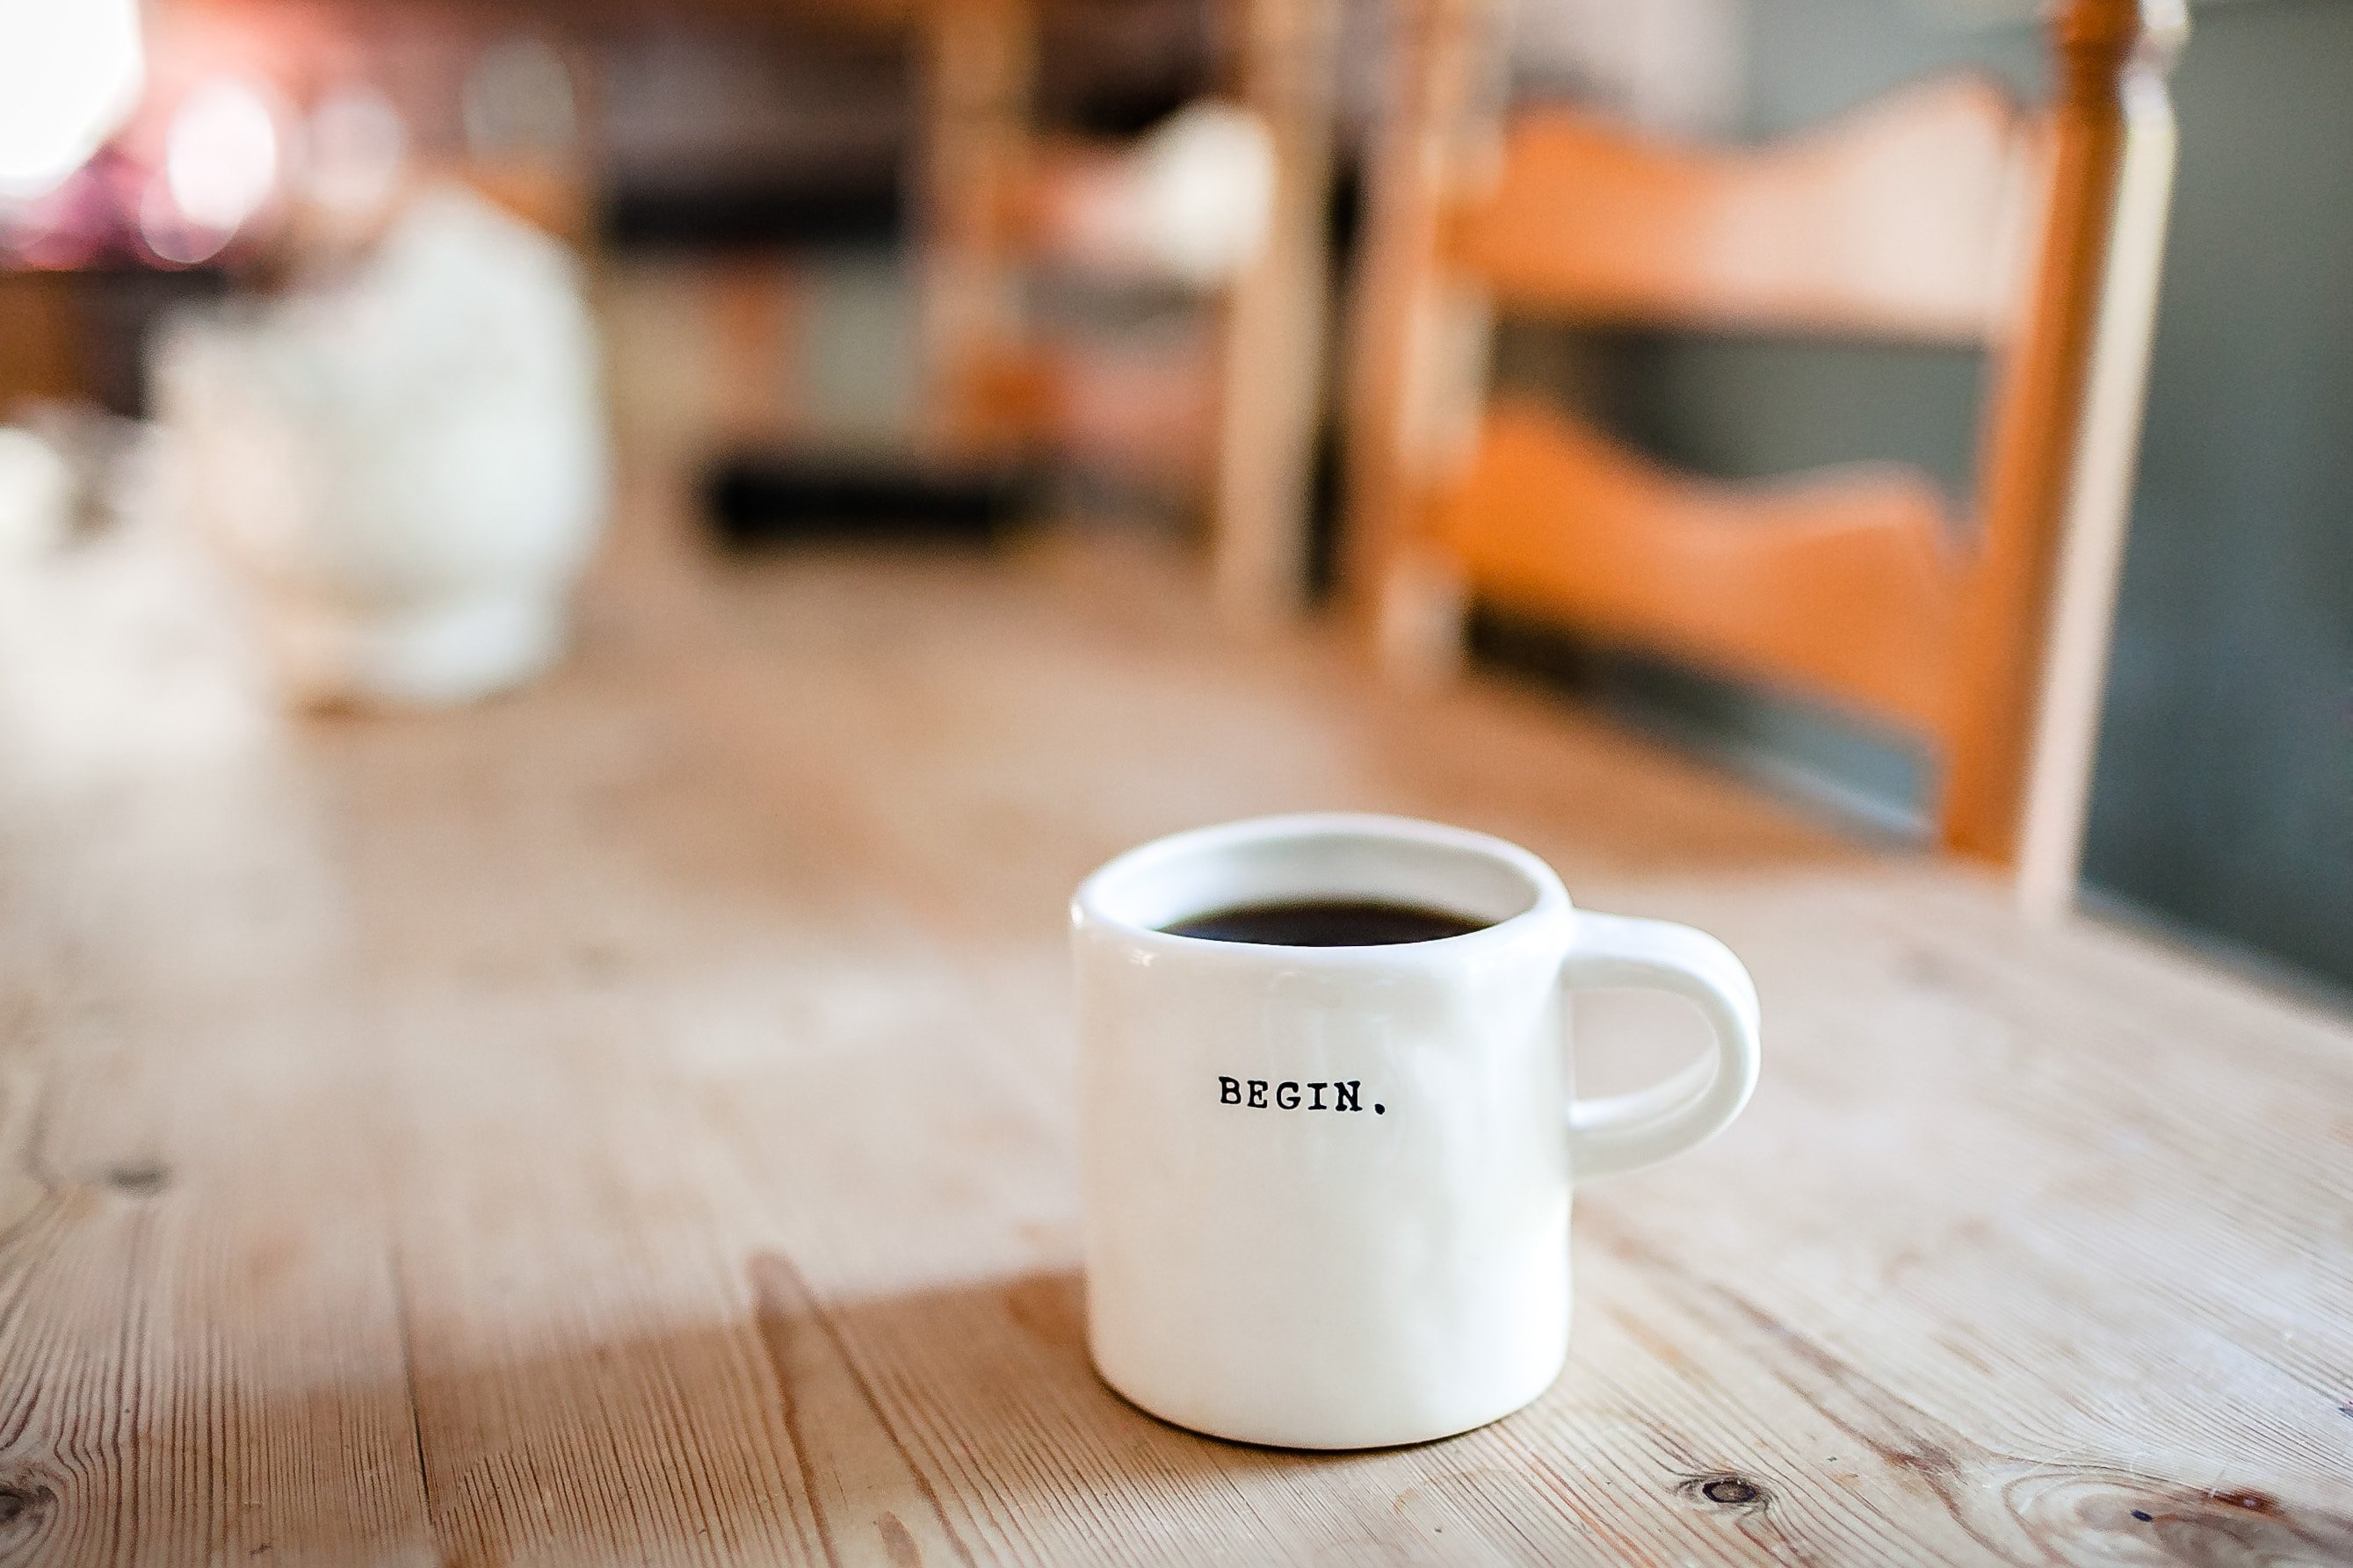 A photo of a white mug filled with coffee with the word “BEGIN” in black typewriter font printed on it.